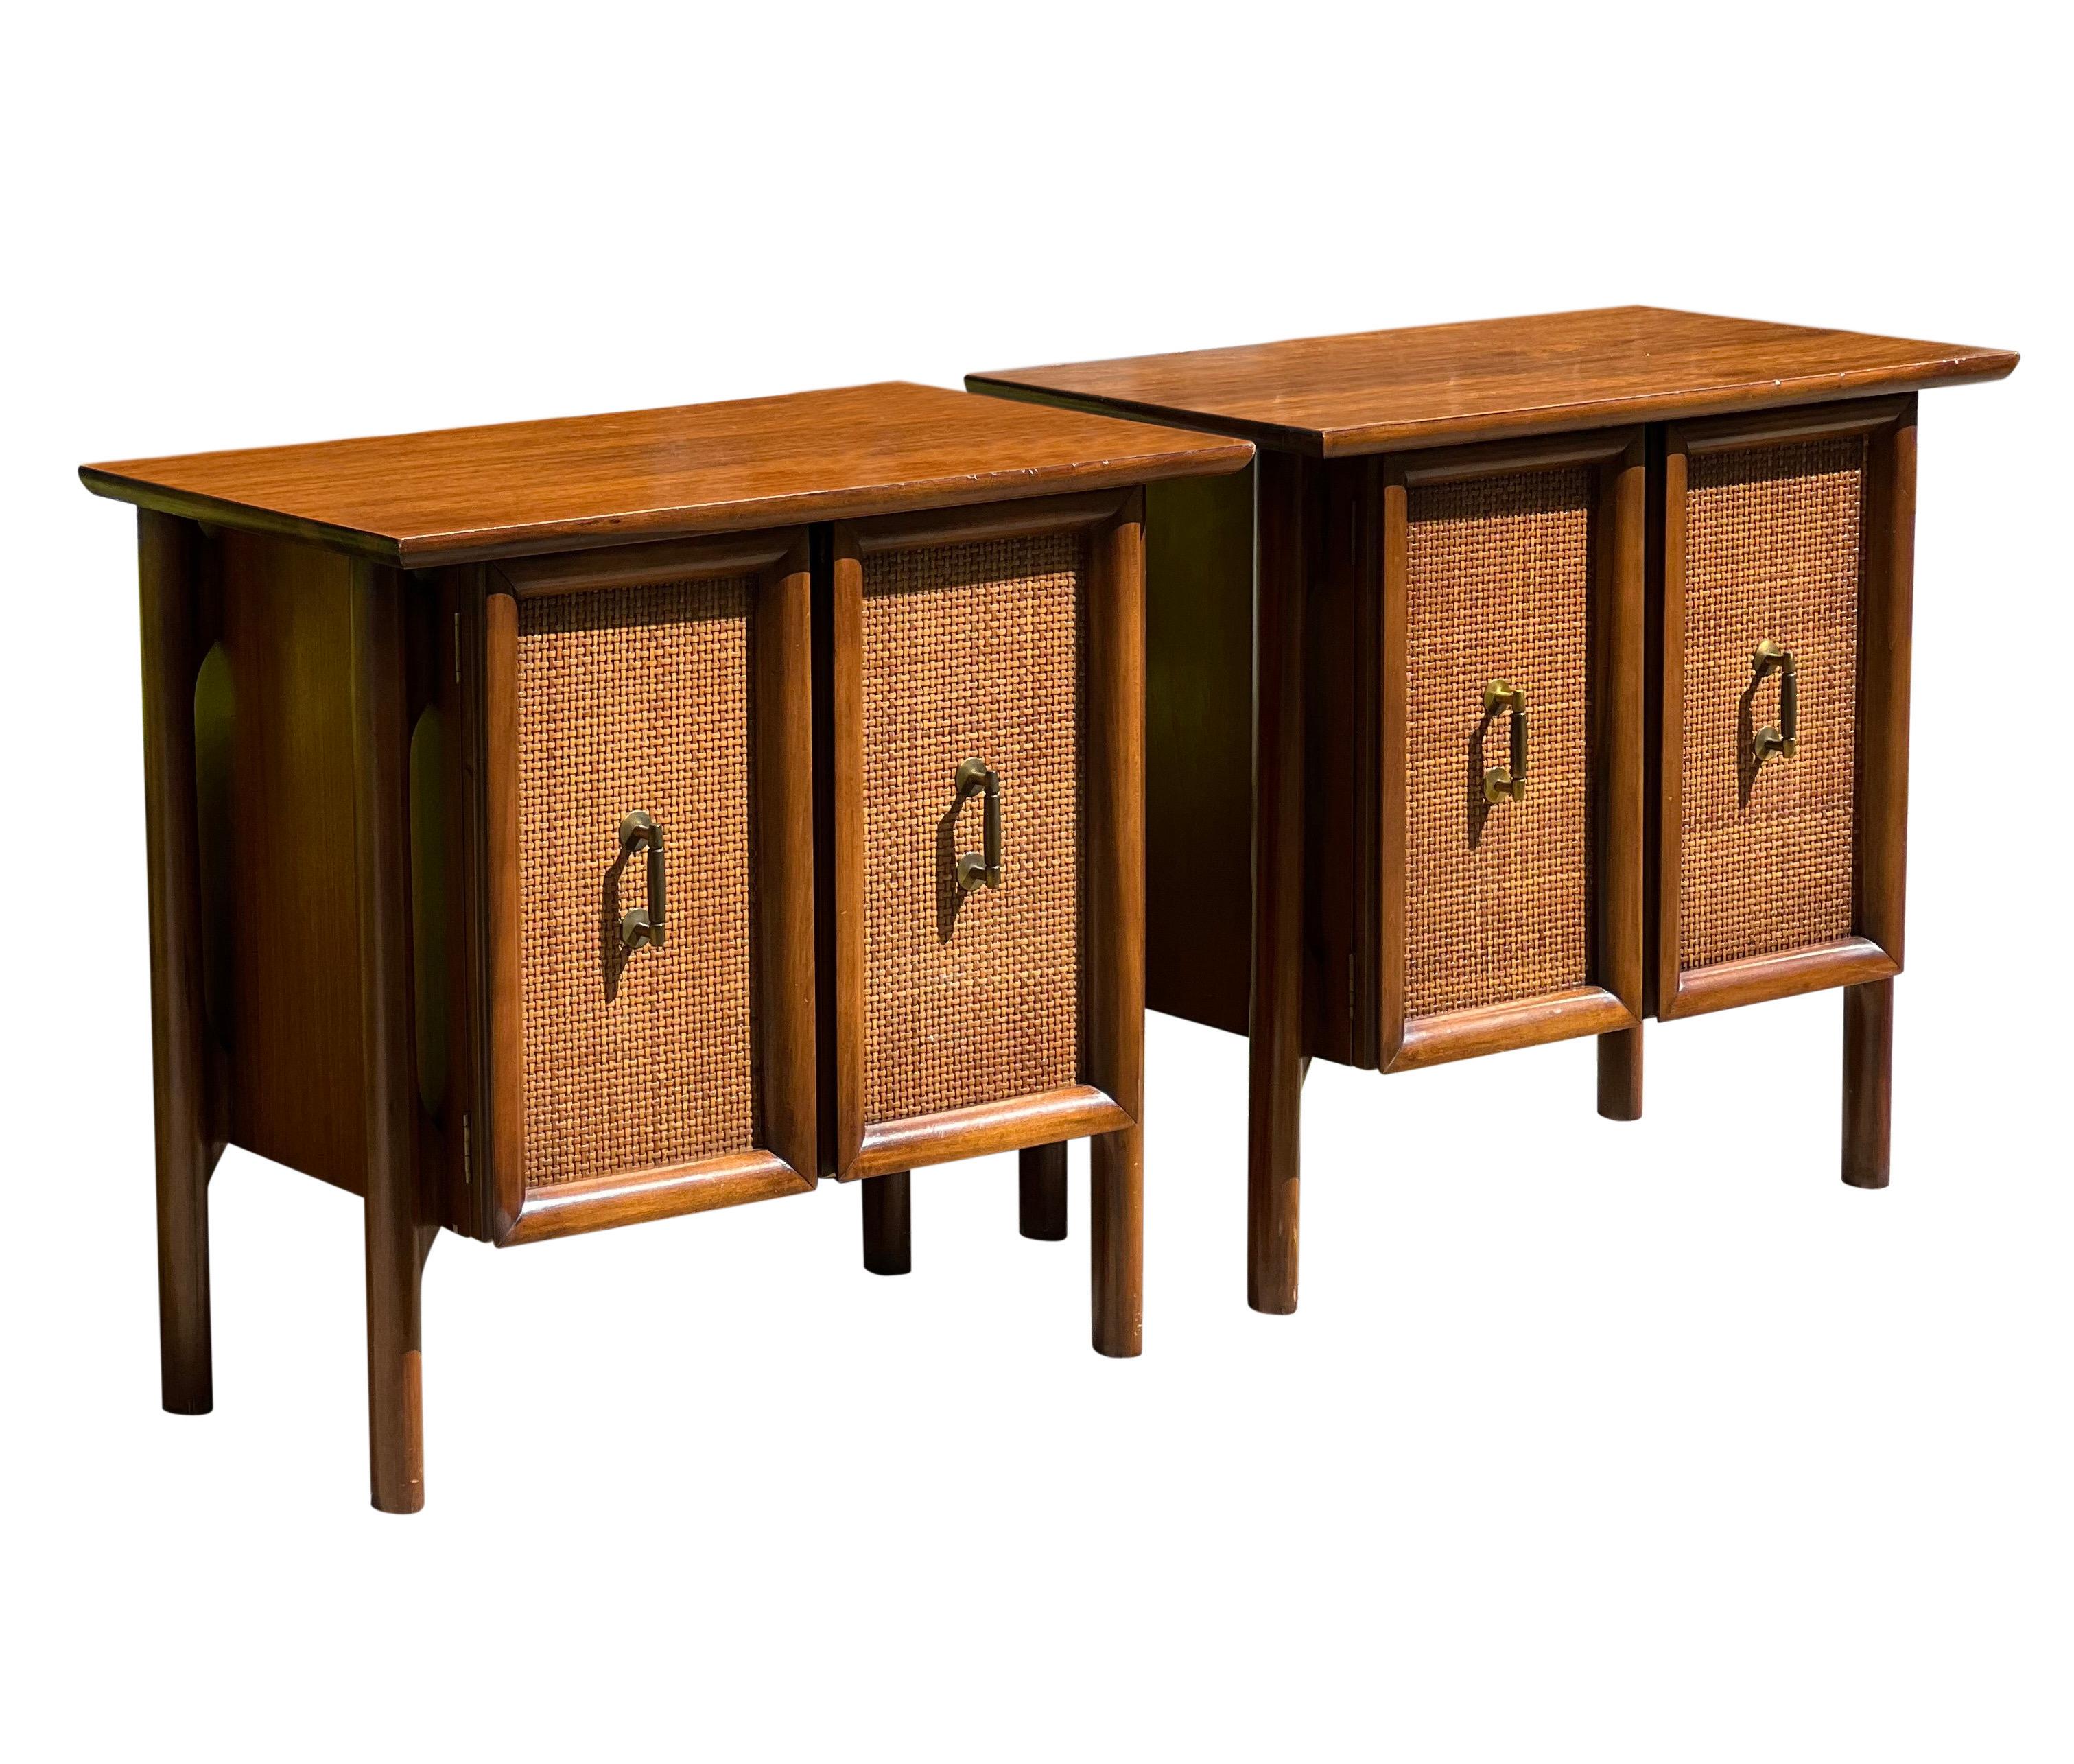 Exceptional Mid Century walnut floating nightstands with cane panel doors.

The nightstands feature floating cabinetry within a sculptural walnut frame with straight, rounded legs. The woven rattan panels are framed by raised, curved walnut. Each